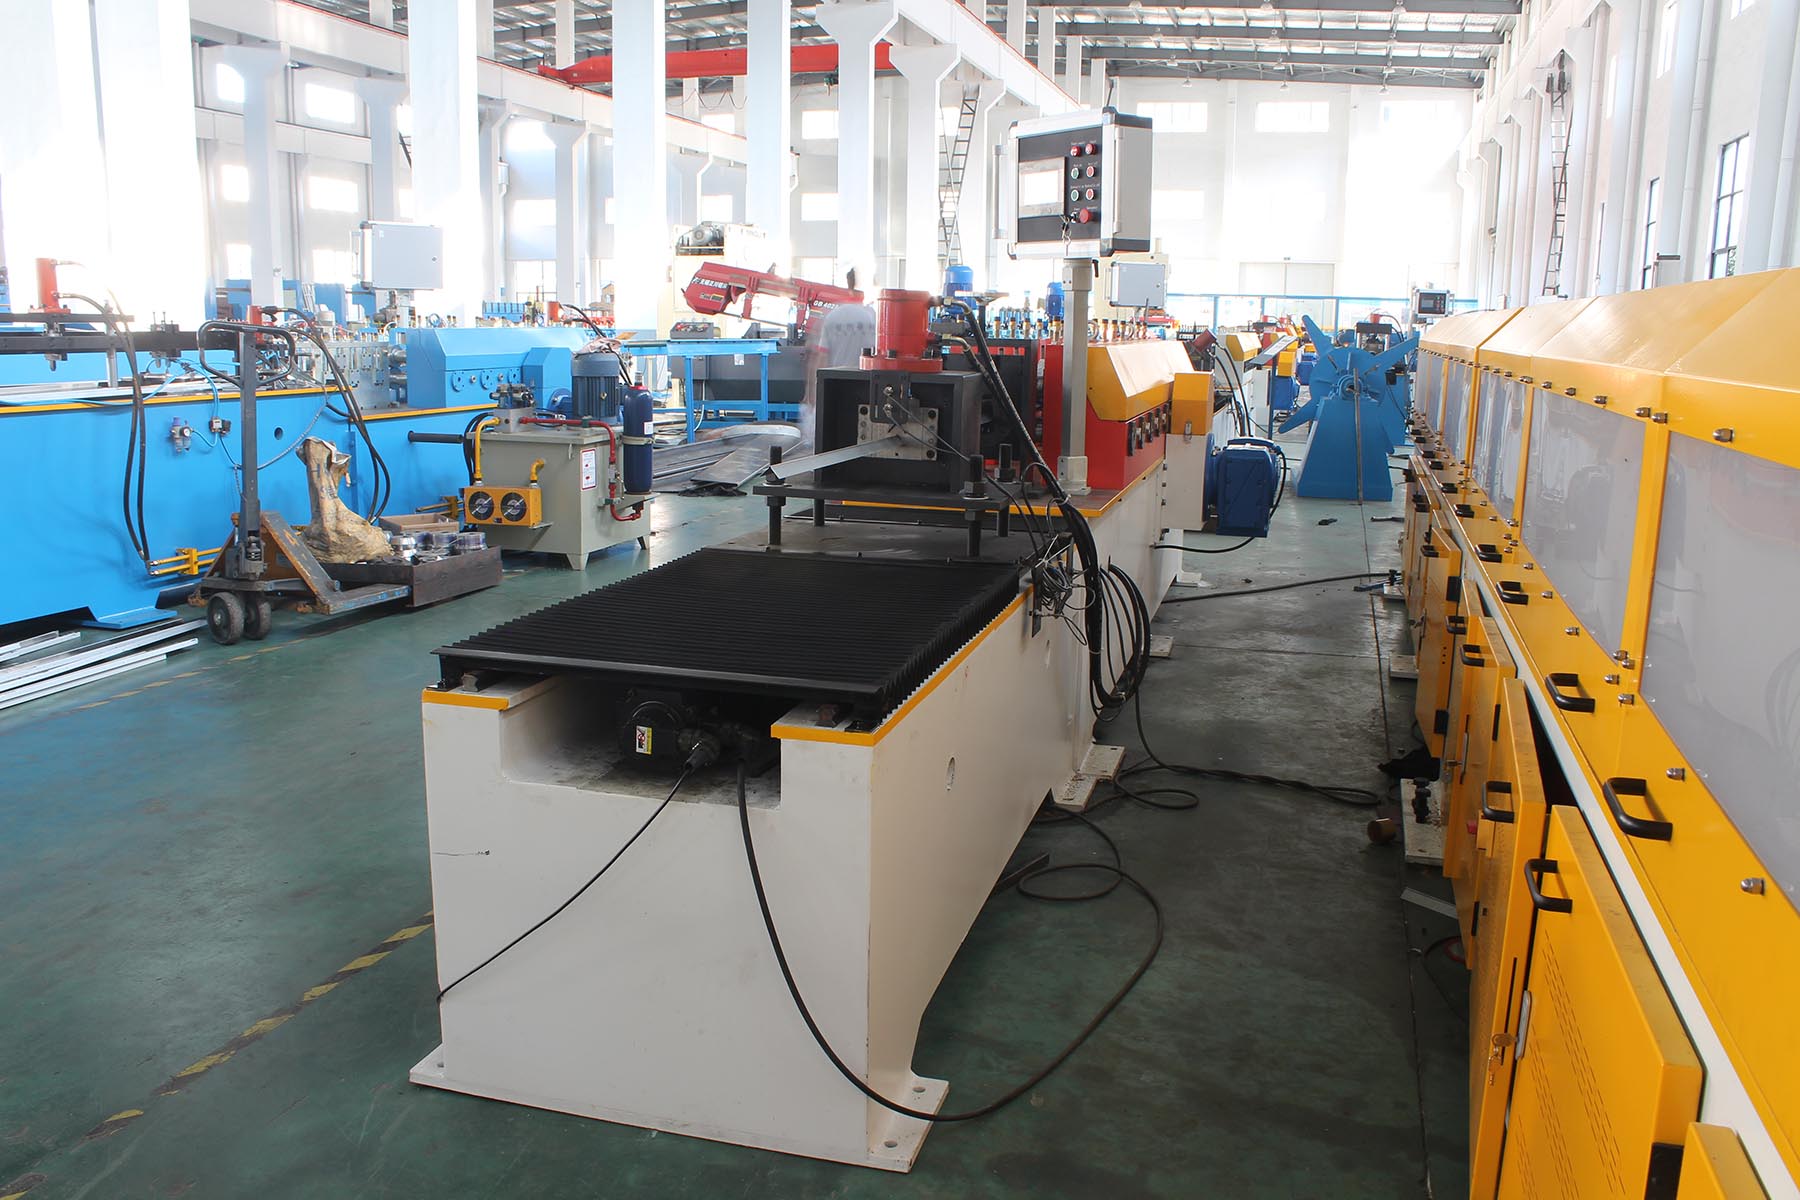 ANGLE ROLL FORMING MACHINE